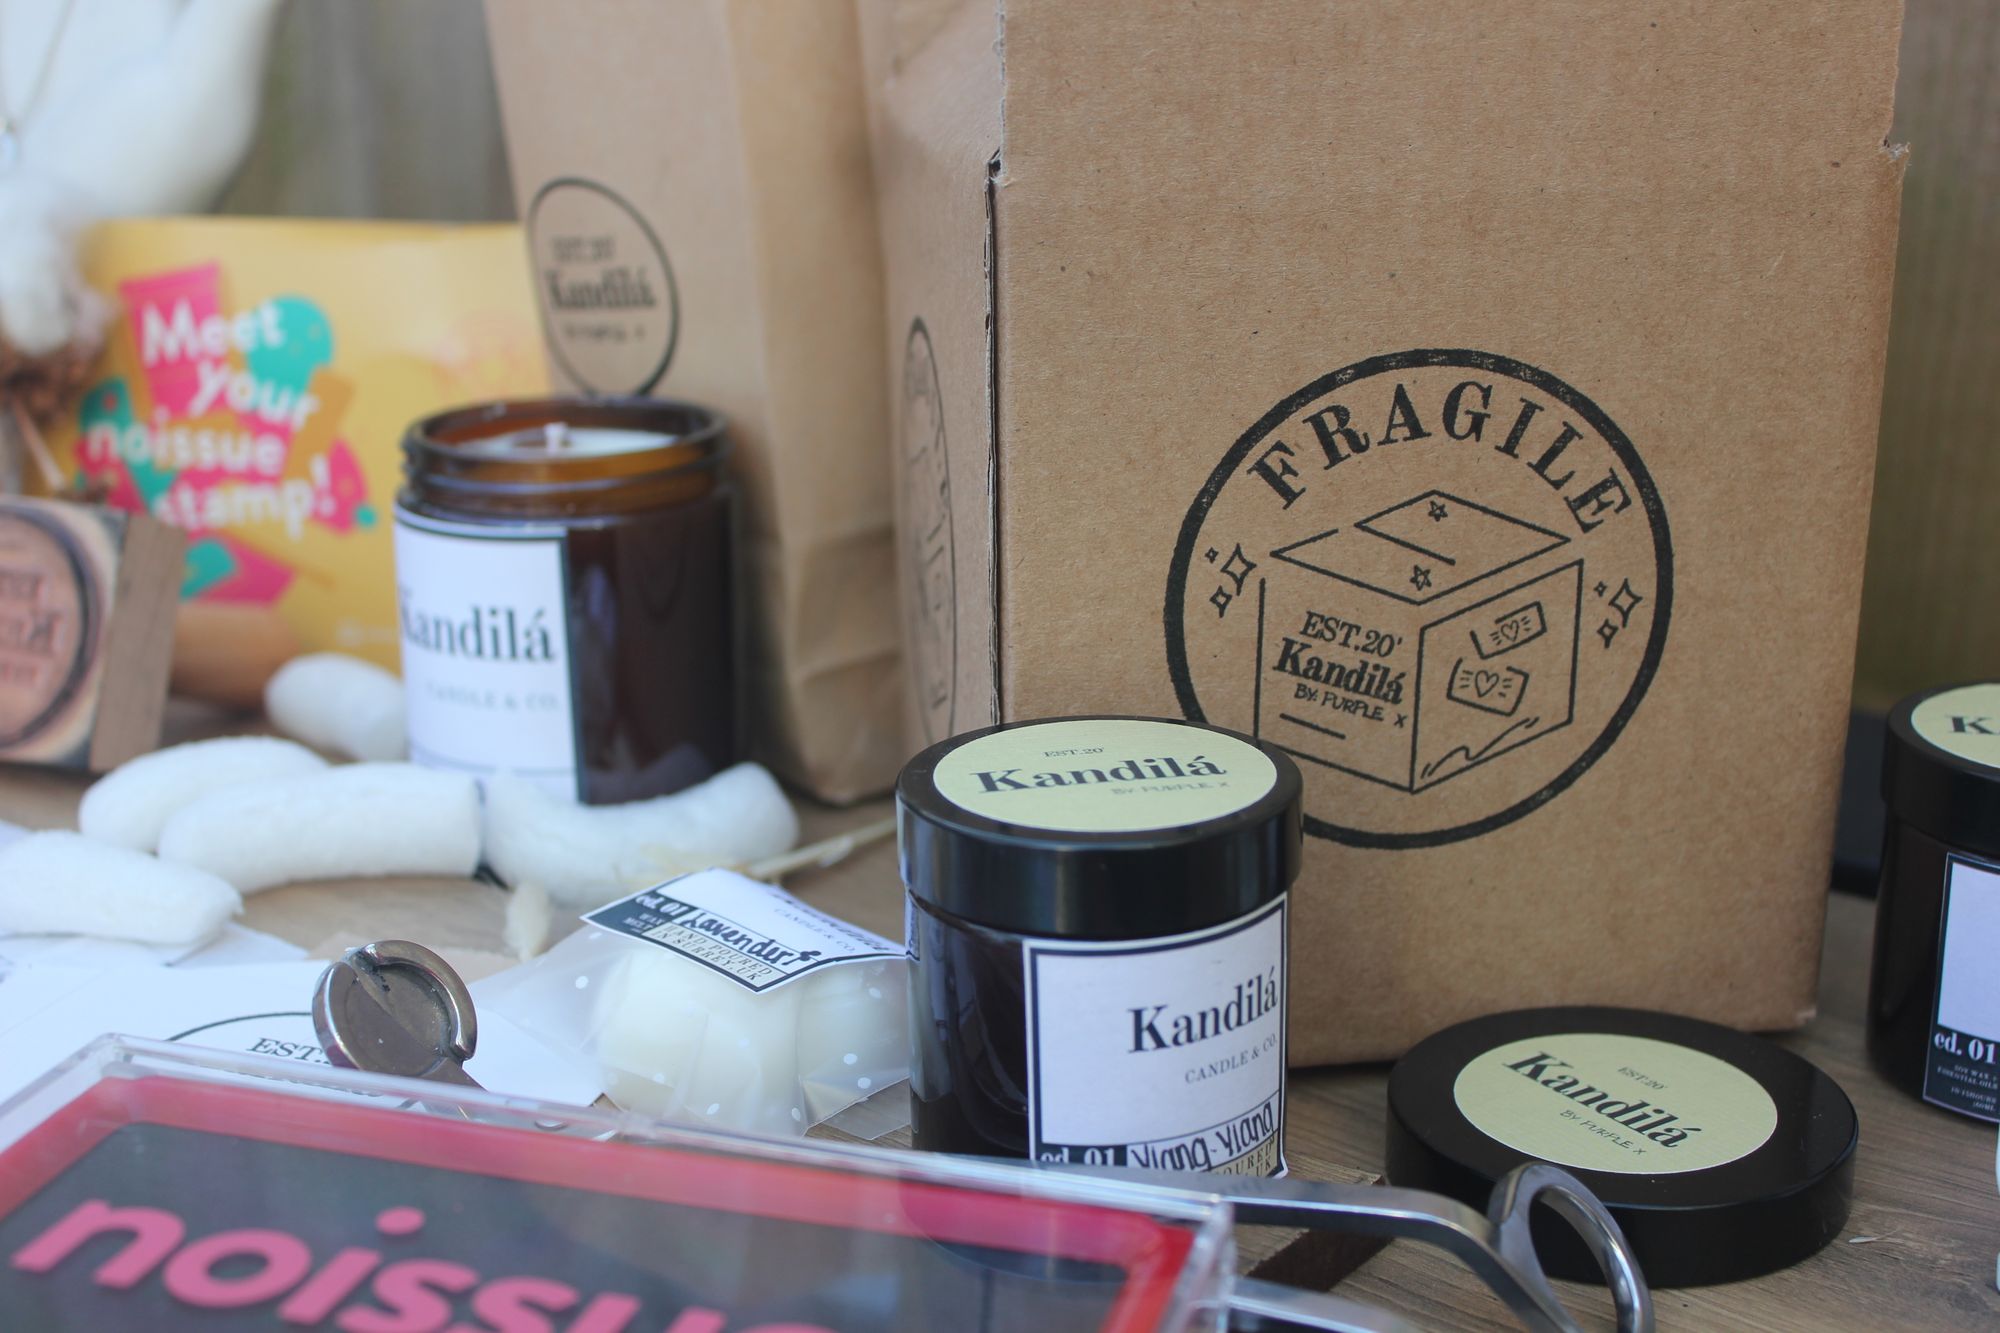 Kandilá Candle & Co: Resonating with Culture and Bringing Back Memories of Home